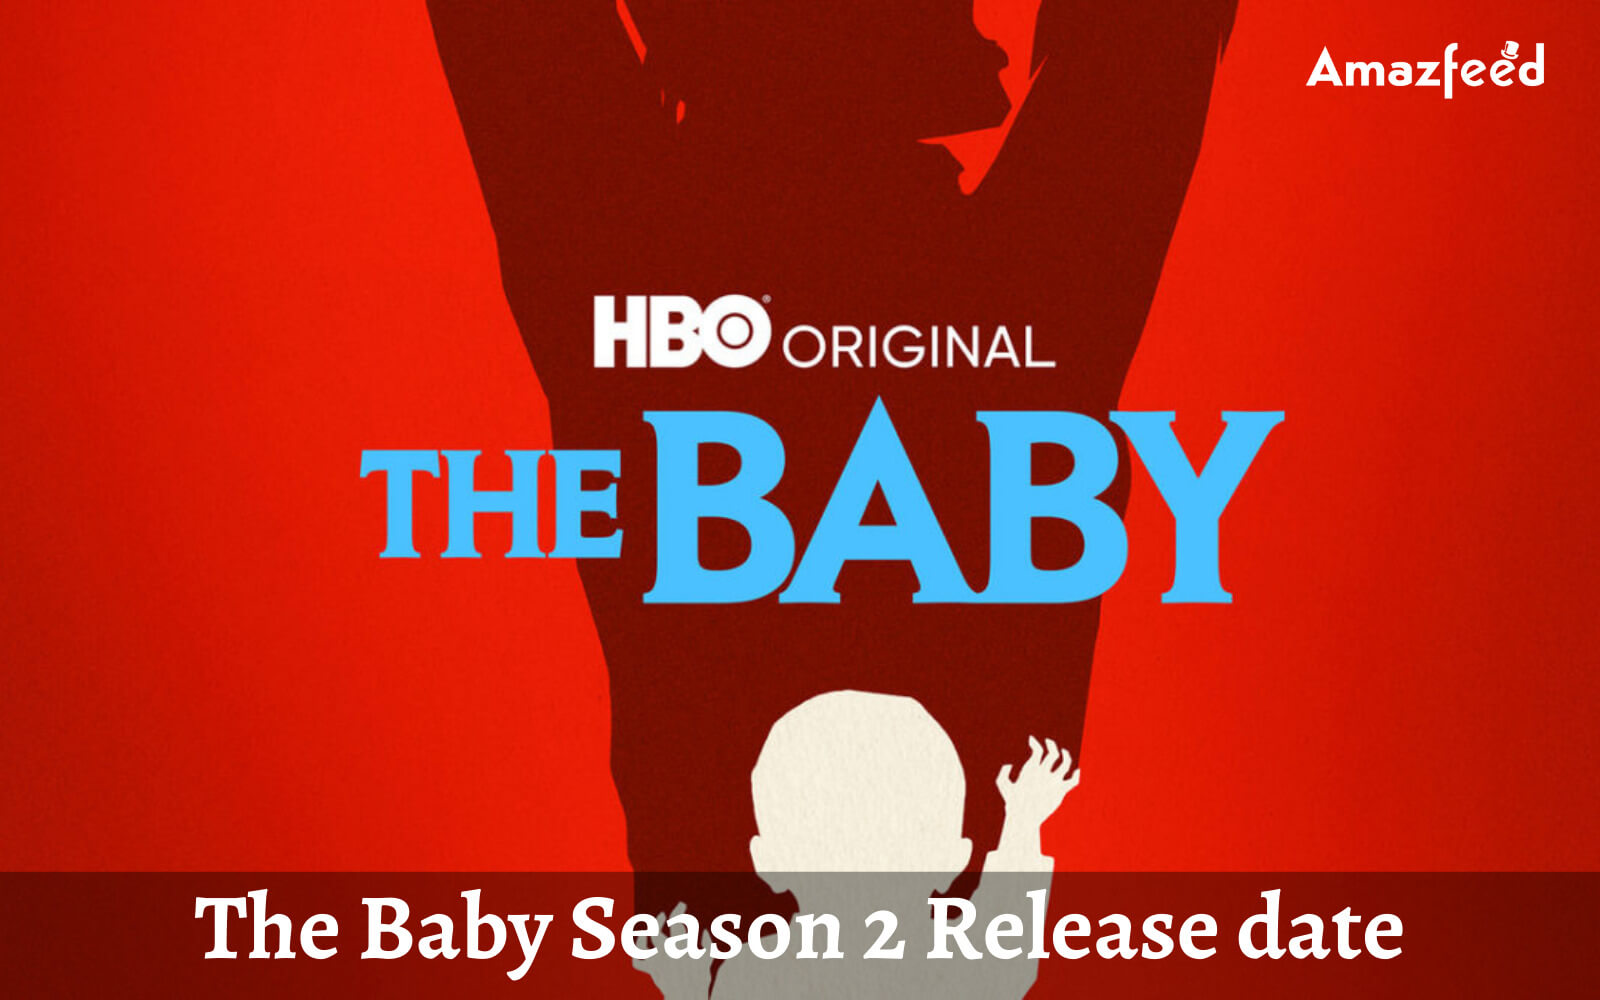 The Baby Season 2 Release date